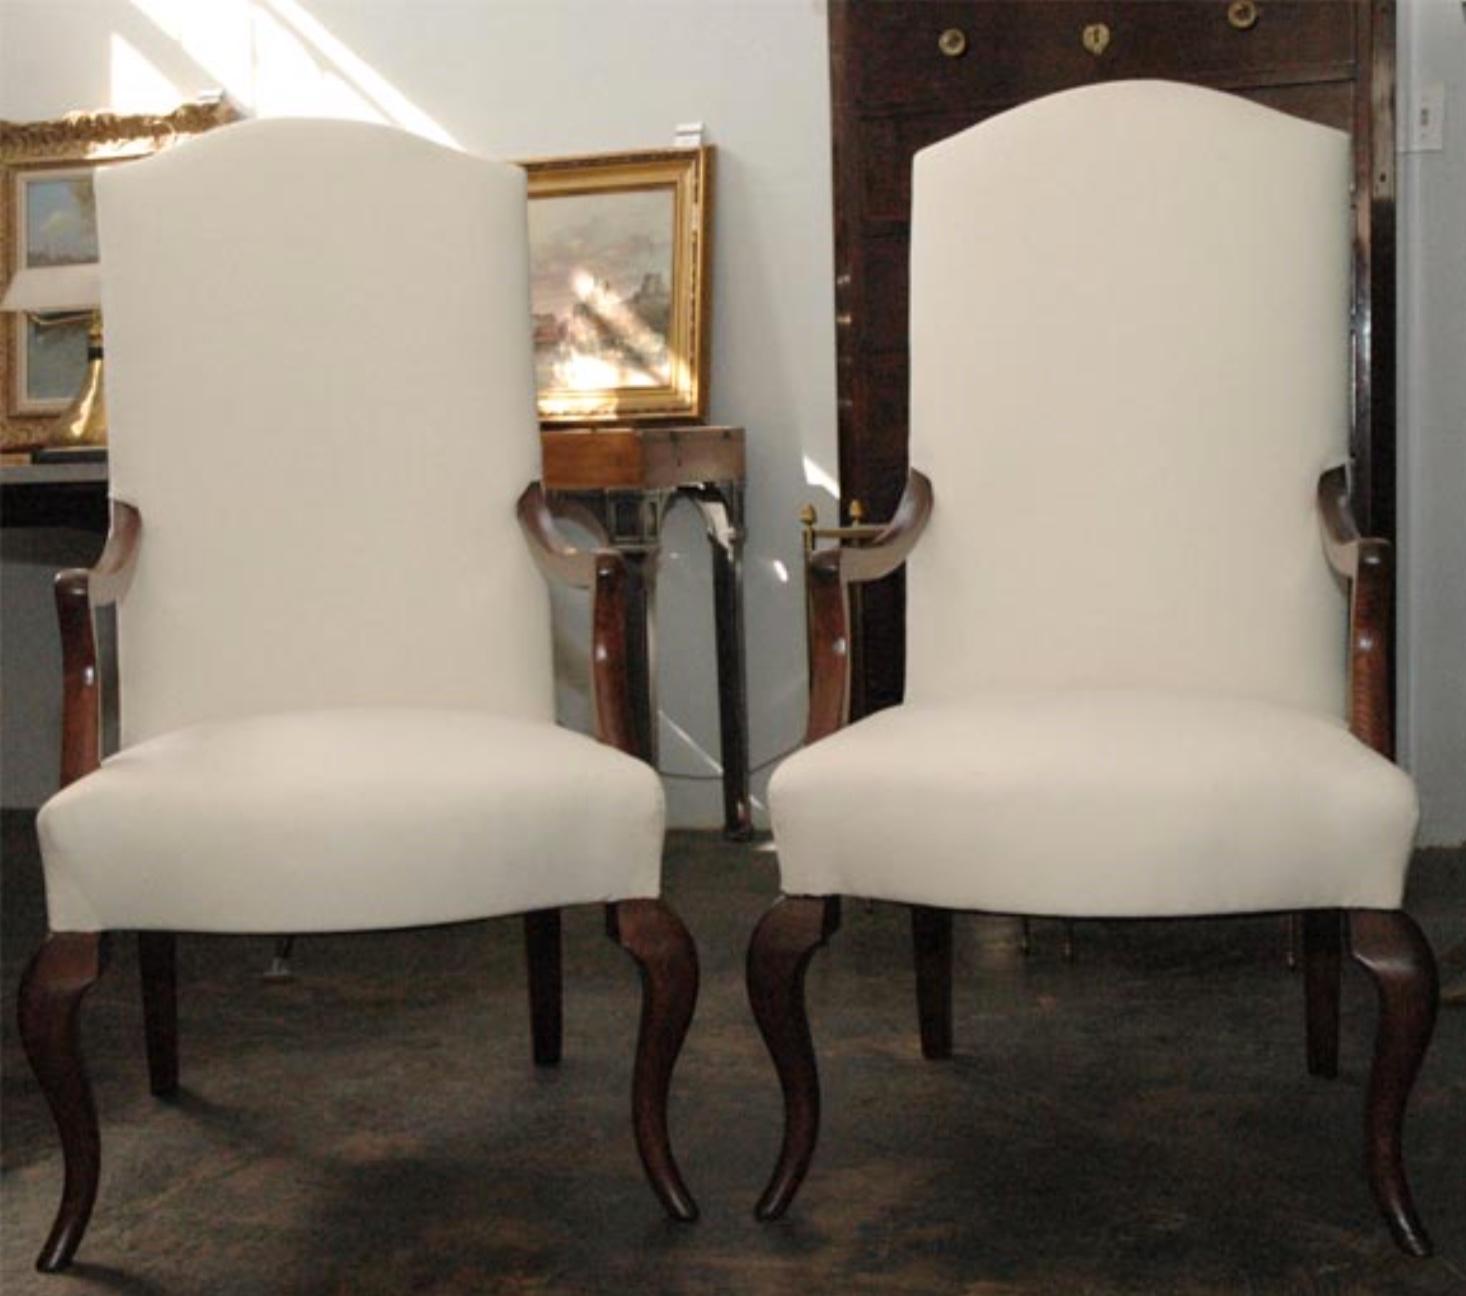 Perfectly proportioned pair of tall armchairs by renowned French 1940s furniture designer and interior decorator Jean-Charles Moreux. Perfect for a chic Parisian style living room.

Reference: Jean-Charles Moreux, Architecte-Decorateur-Paysagiste;